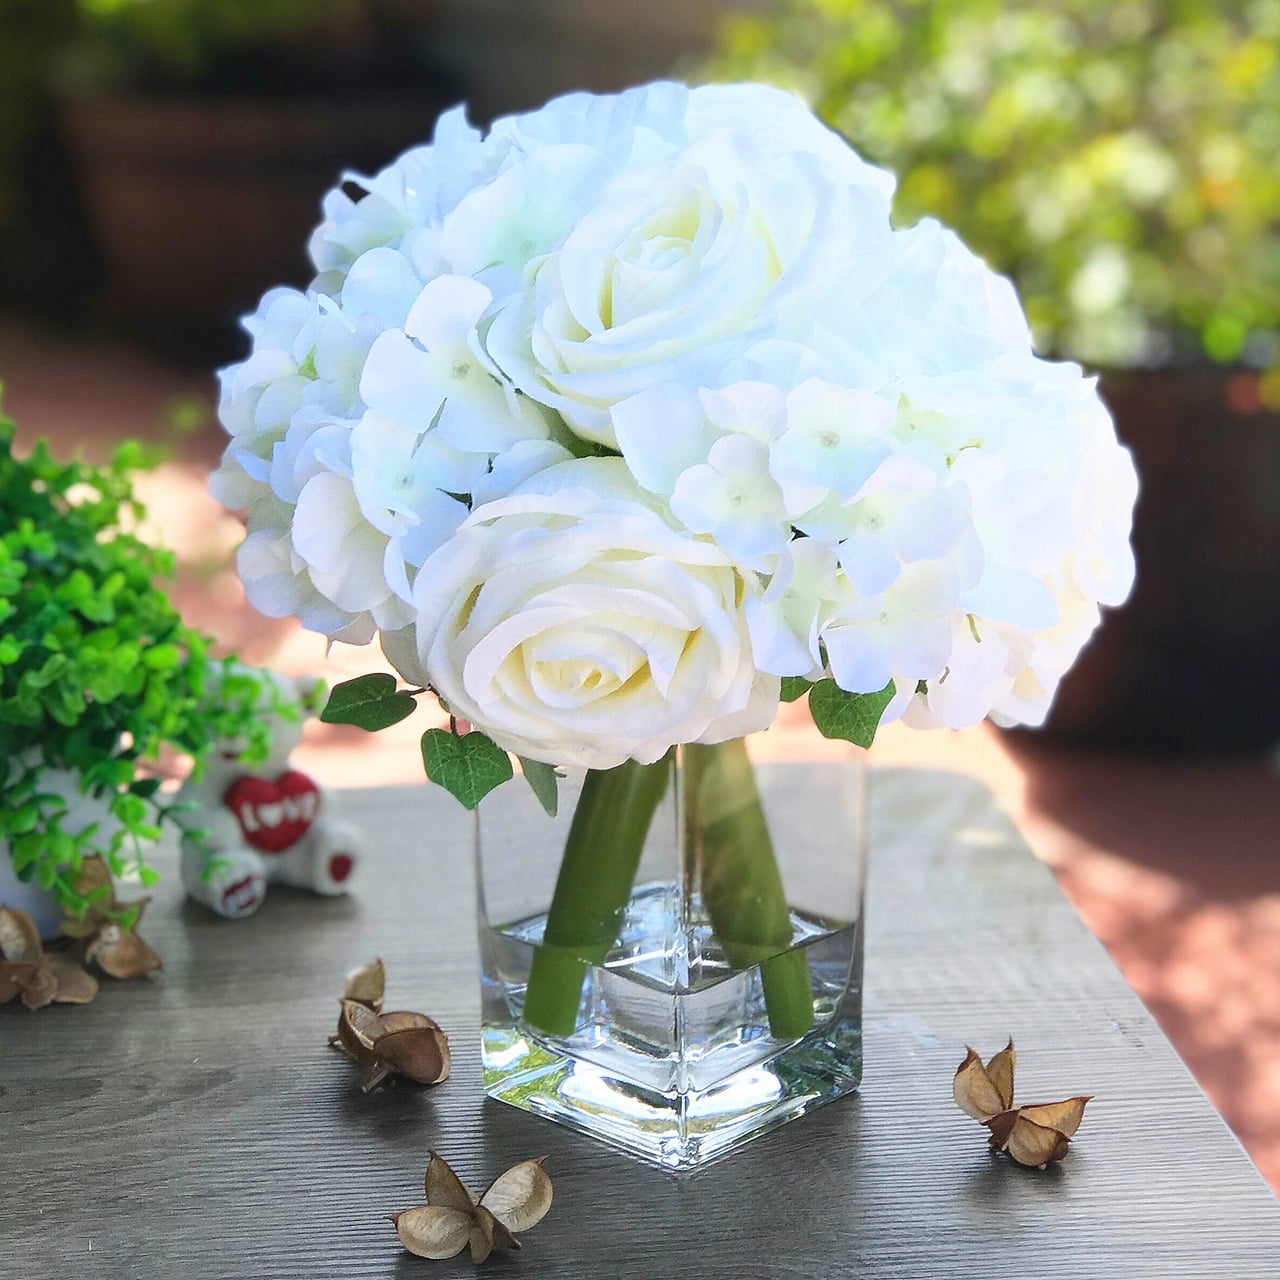 Ludlz 5PCS Artificial Baby Breath Flowers Fake Gypsophila Bouquets Fake  Real Touch Flowers for Wedding Decor DIY Home Party Ornamental Vase Bottle